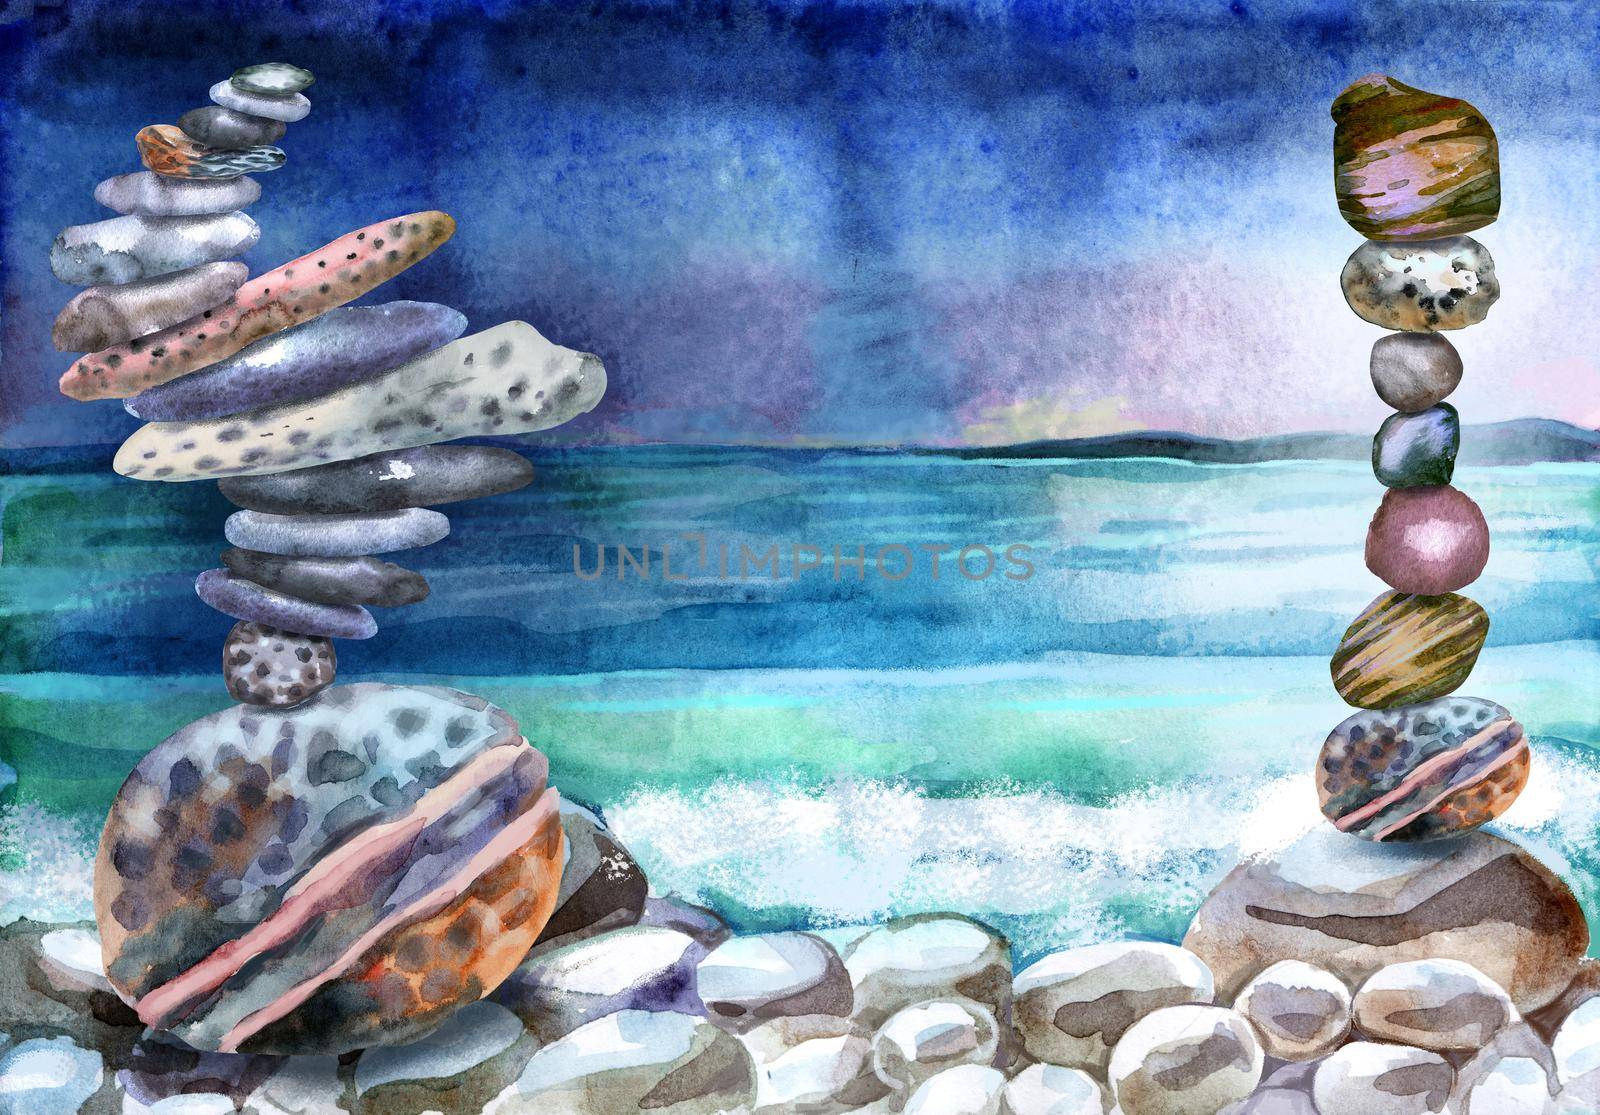 Watercolor hand-drawn landscape with stacks of flat pebbles and ocean by NataOmsk